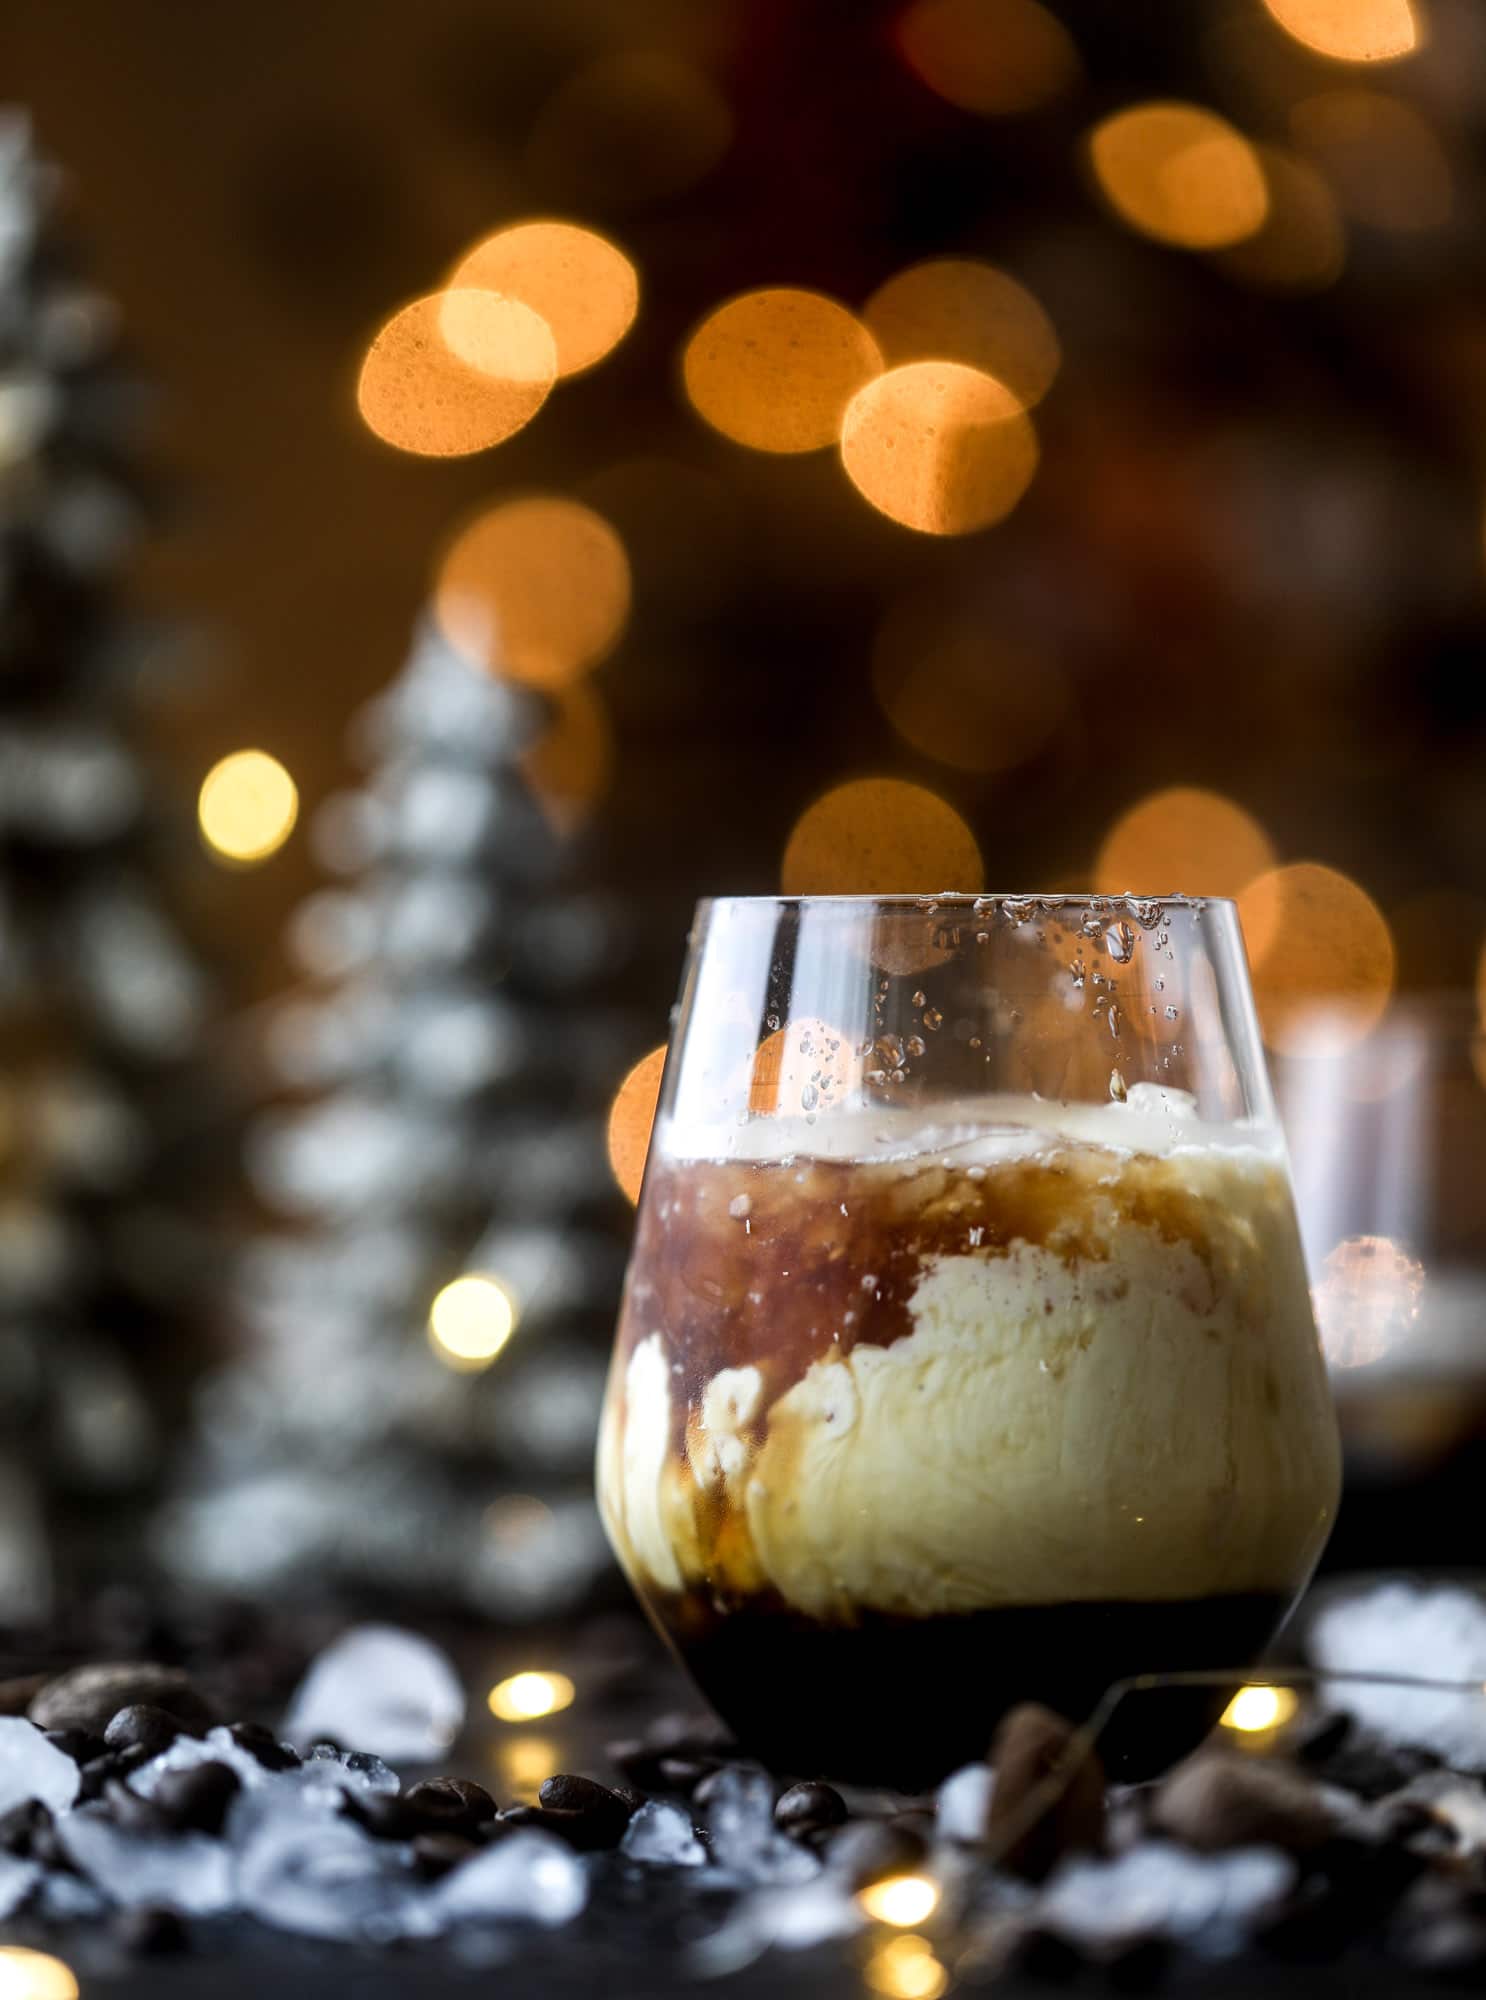 The eggnog white russian cocktail is perfect for the holiday season! Coffee liqueur mixed with vanilla vodka and eggnog and topped with freshly grated nutmeg is the perfect treat and oh-so festive! I howsweeteats.com #eggnog #whiterussian